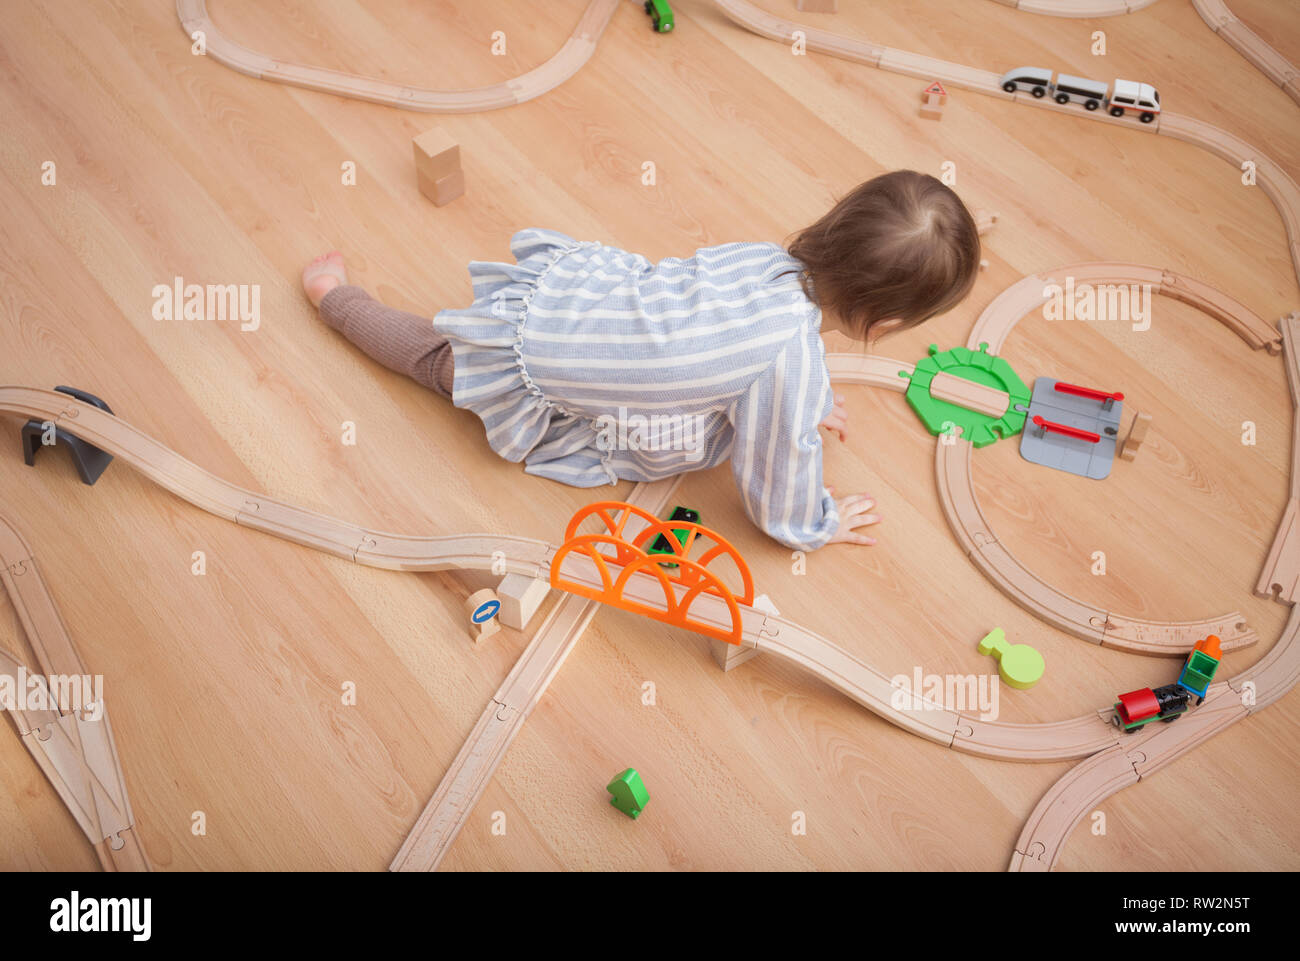 Cute kid playing with toy railway road at home Stock Photo